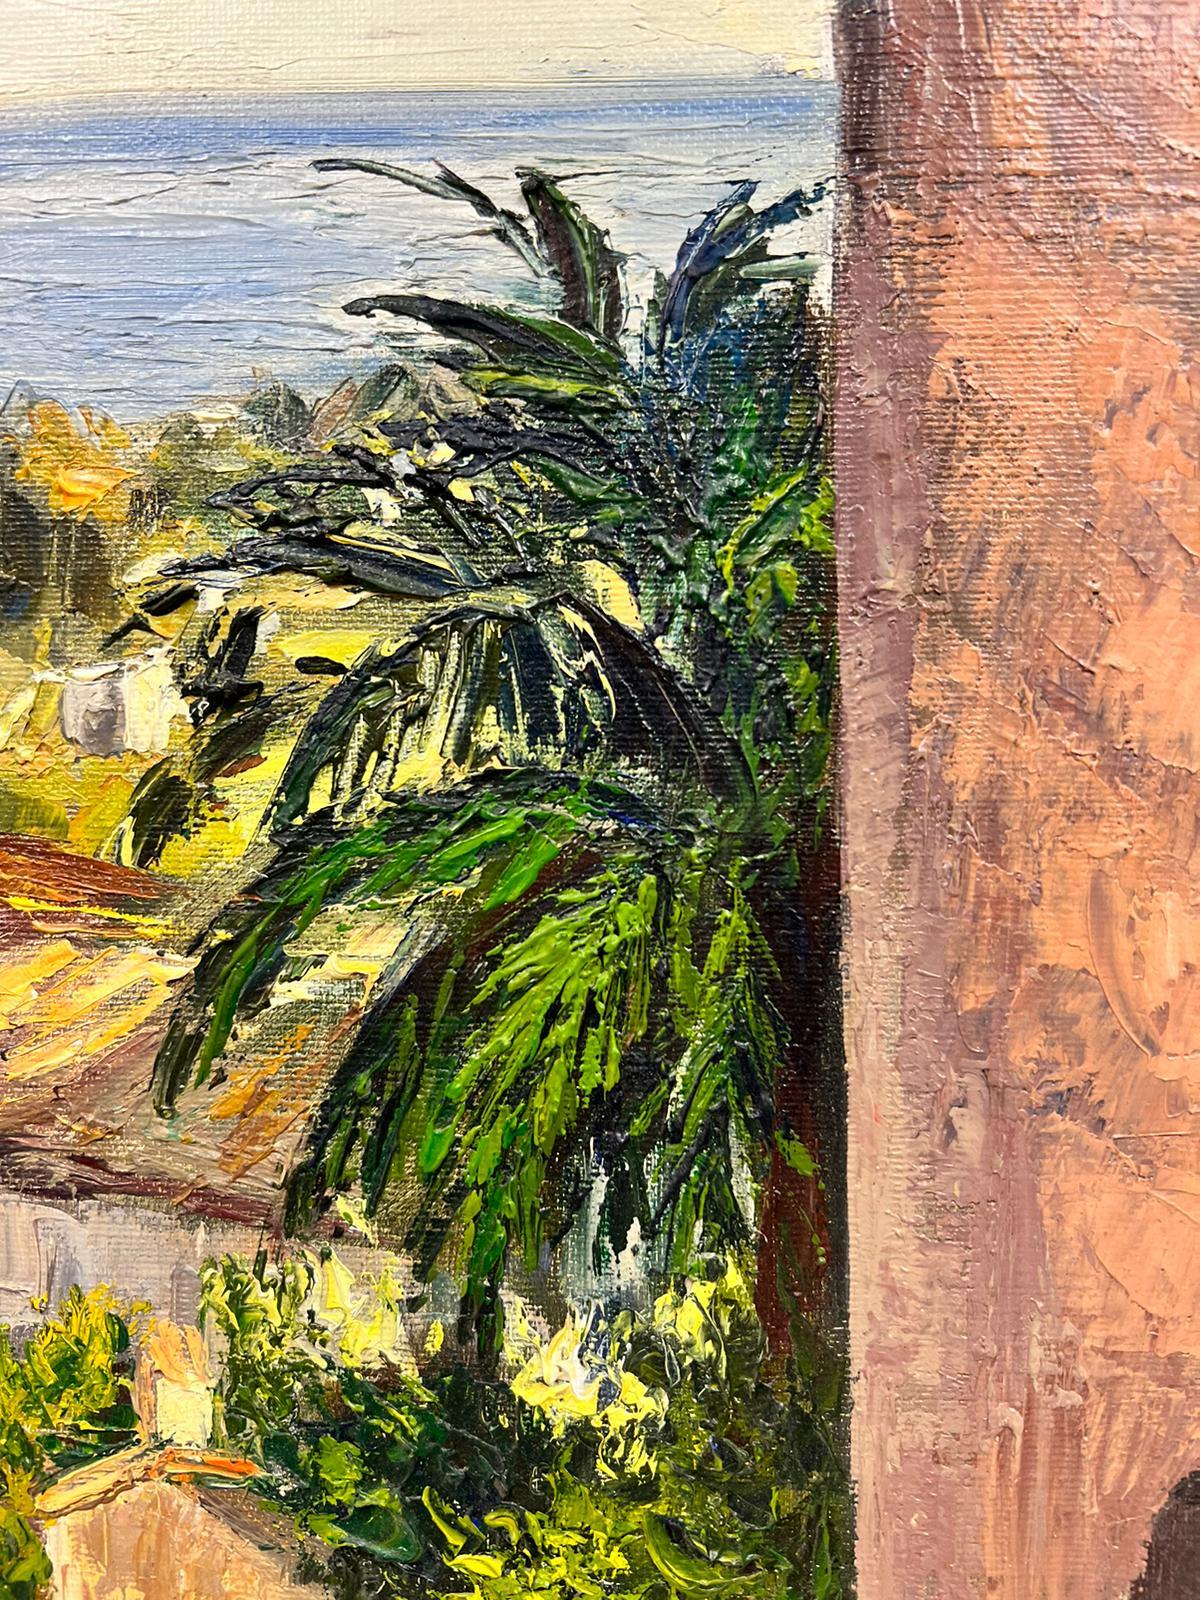 Cagnes sur Mer
by Josine Vignon (French 1922-2022)
signed and inscribed verso
dated 1960
oil painting on canvas, unframed

canvas: 18 x 13 inches

Colors: Grey colors, green, beige, blue and brown

Very good condition. 

Provenance: from the artists